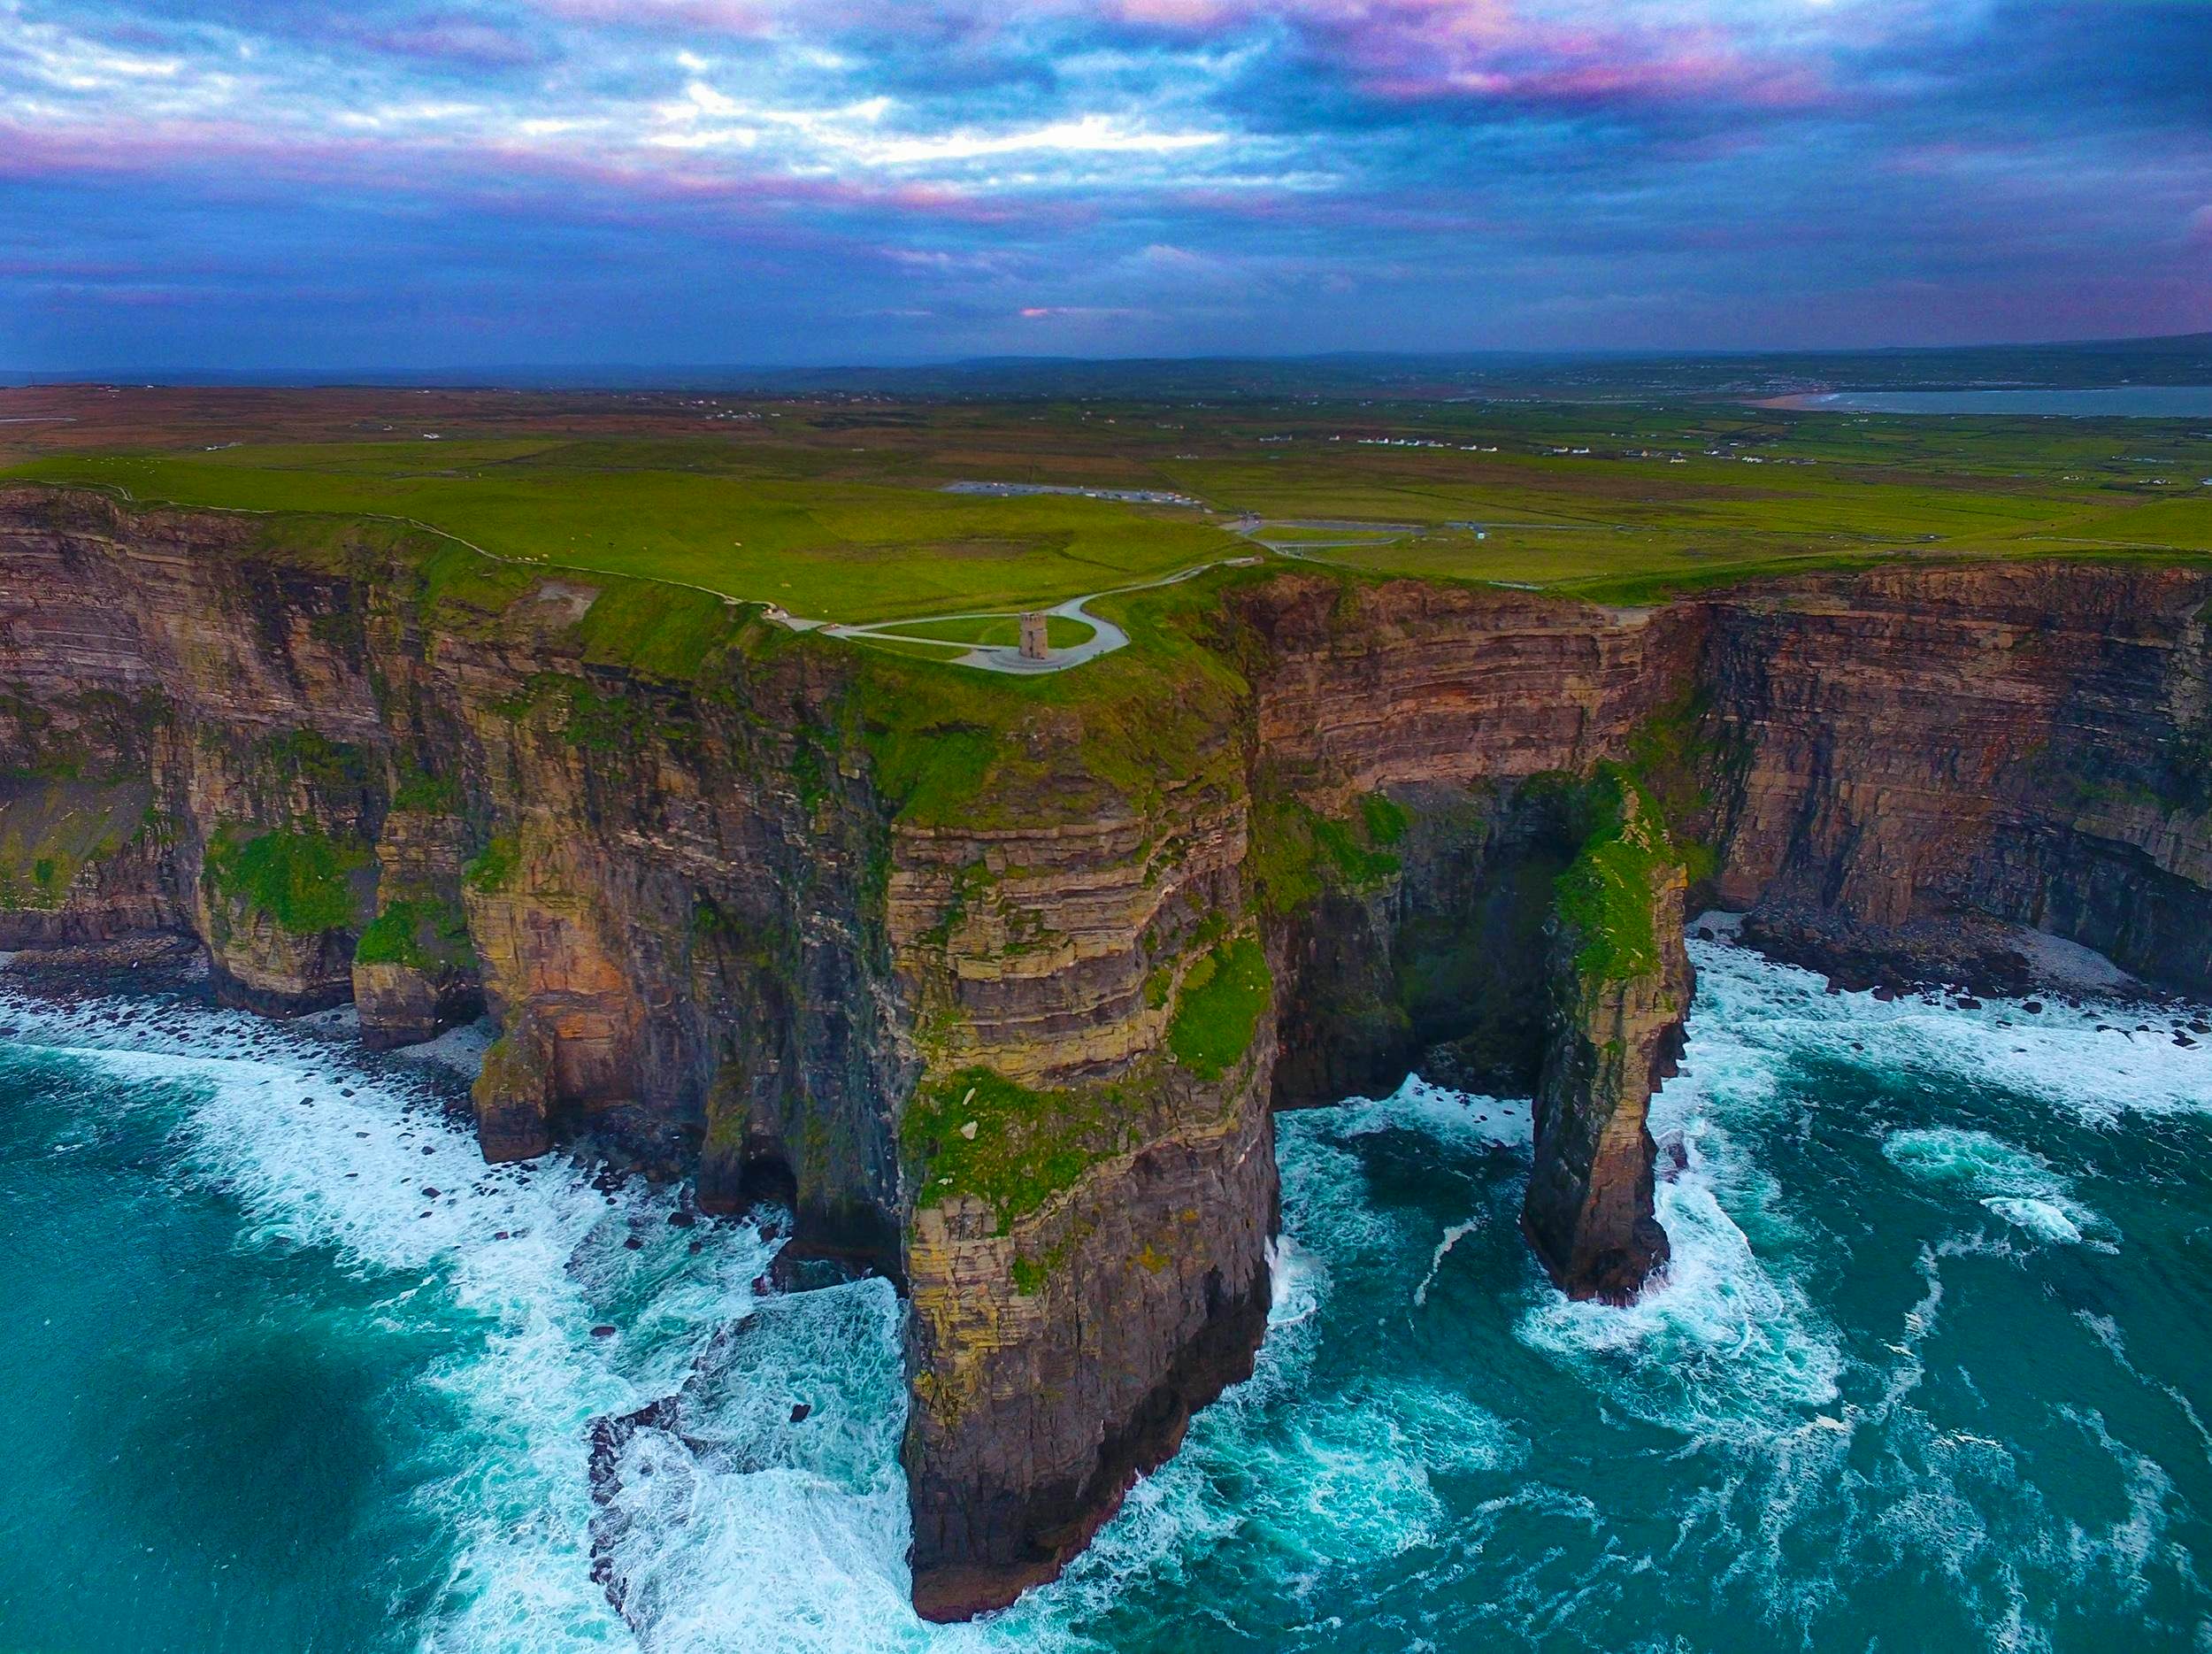 Skip the Line: Cliffs of Moher Admission Ticket